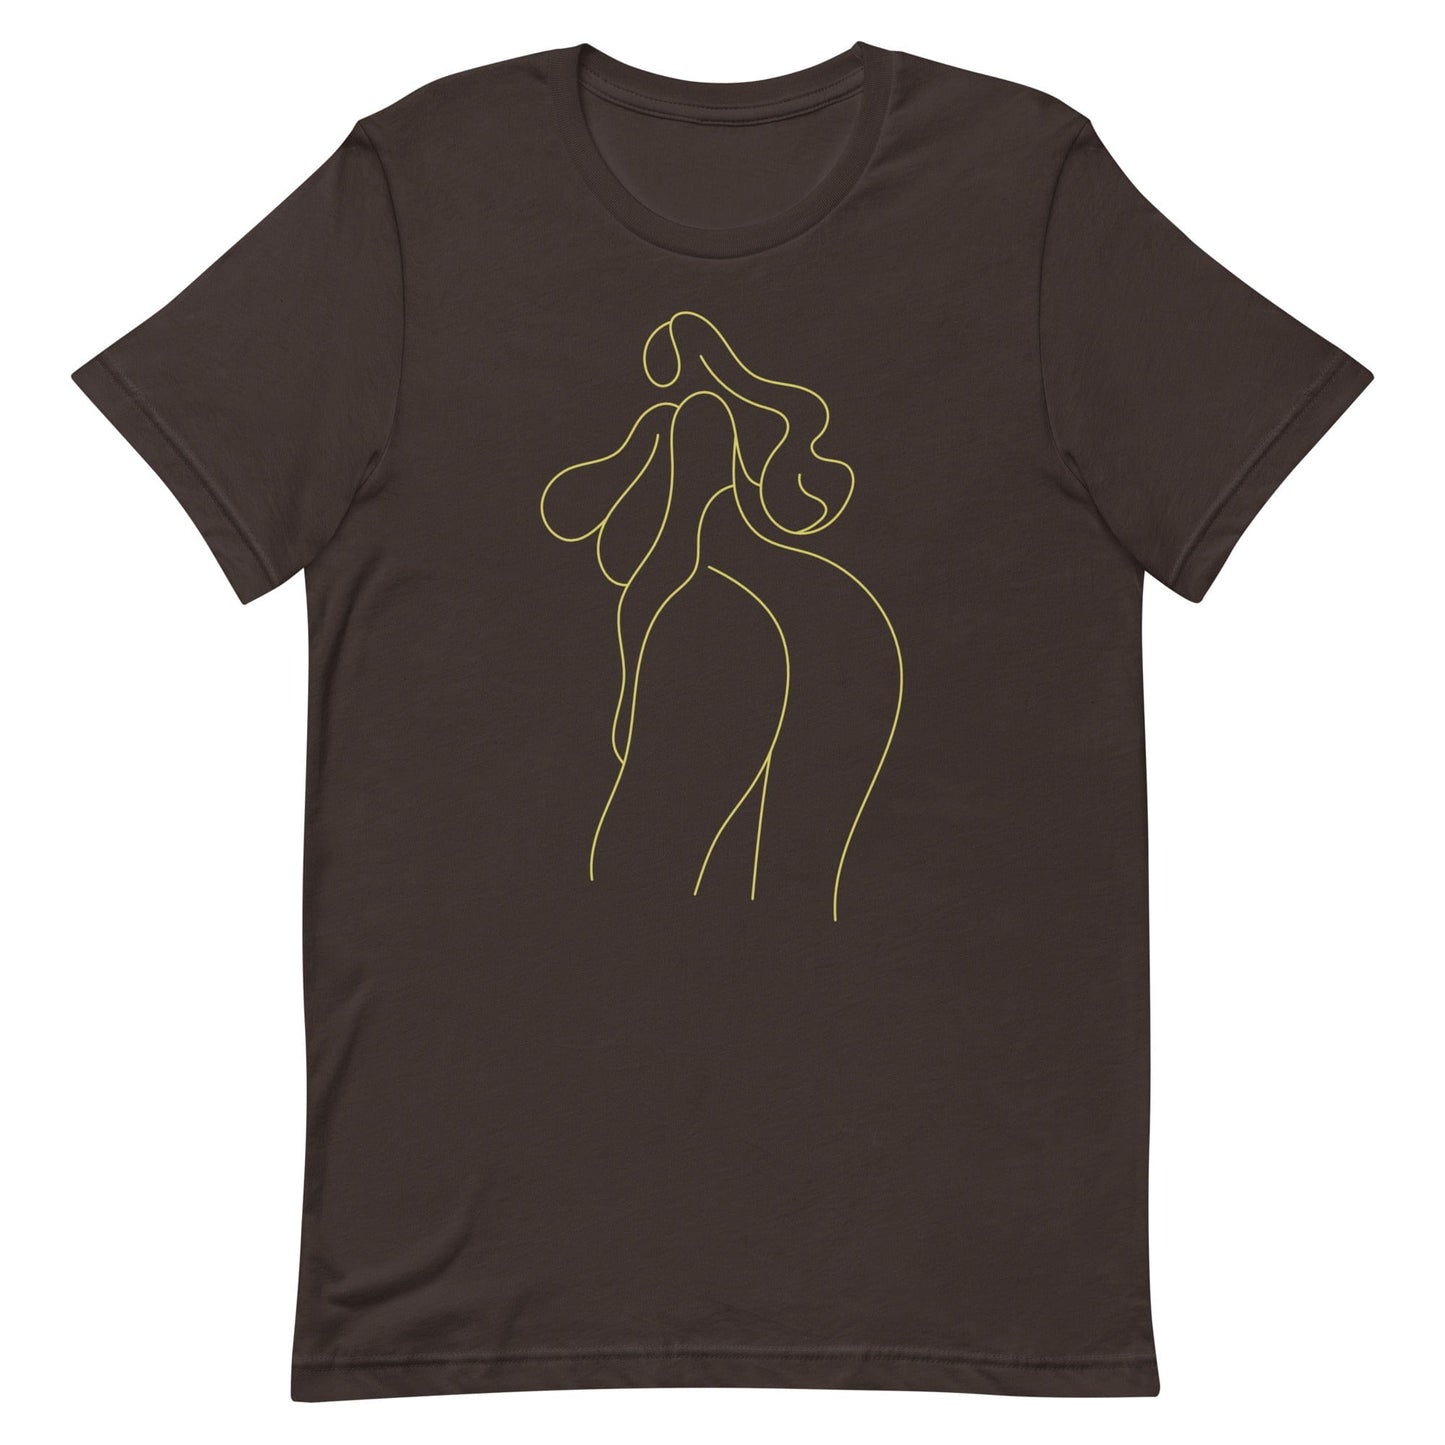 yellow-woman-silhouette-drawing-feminist-t-shirt-apparel-brown-front